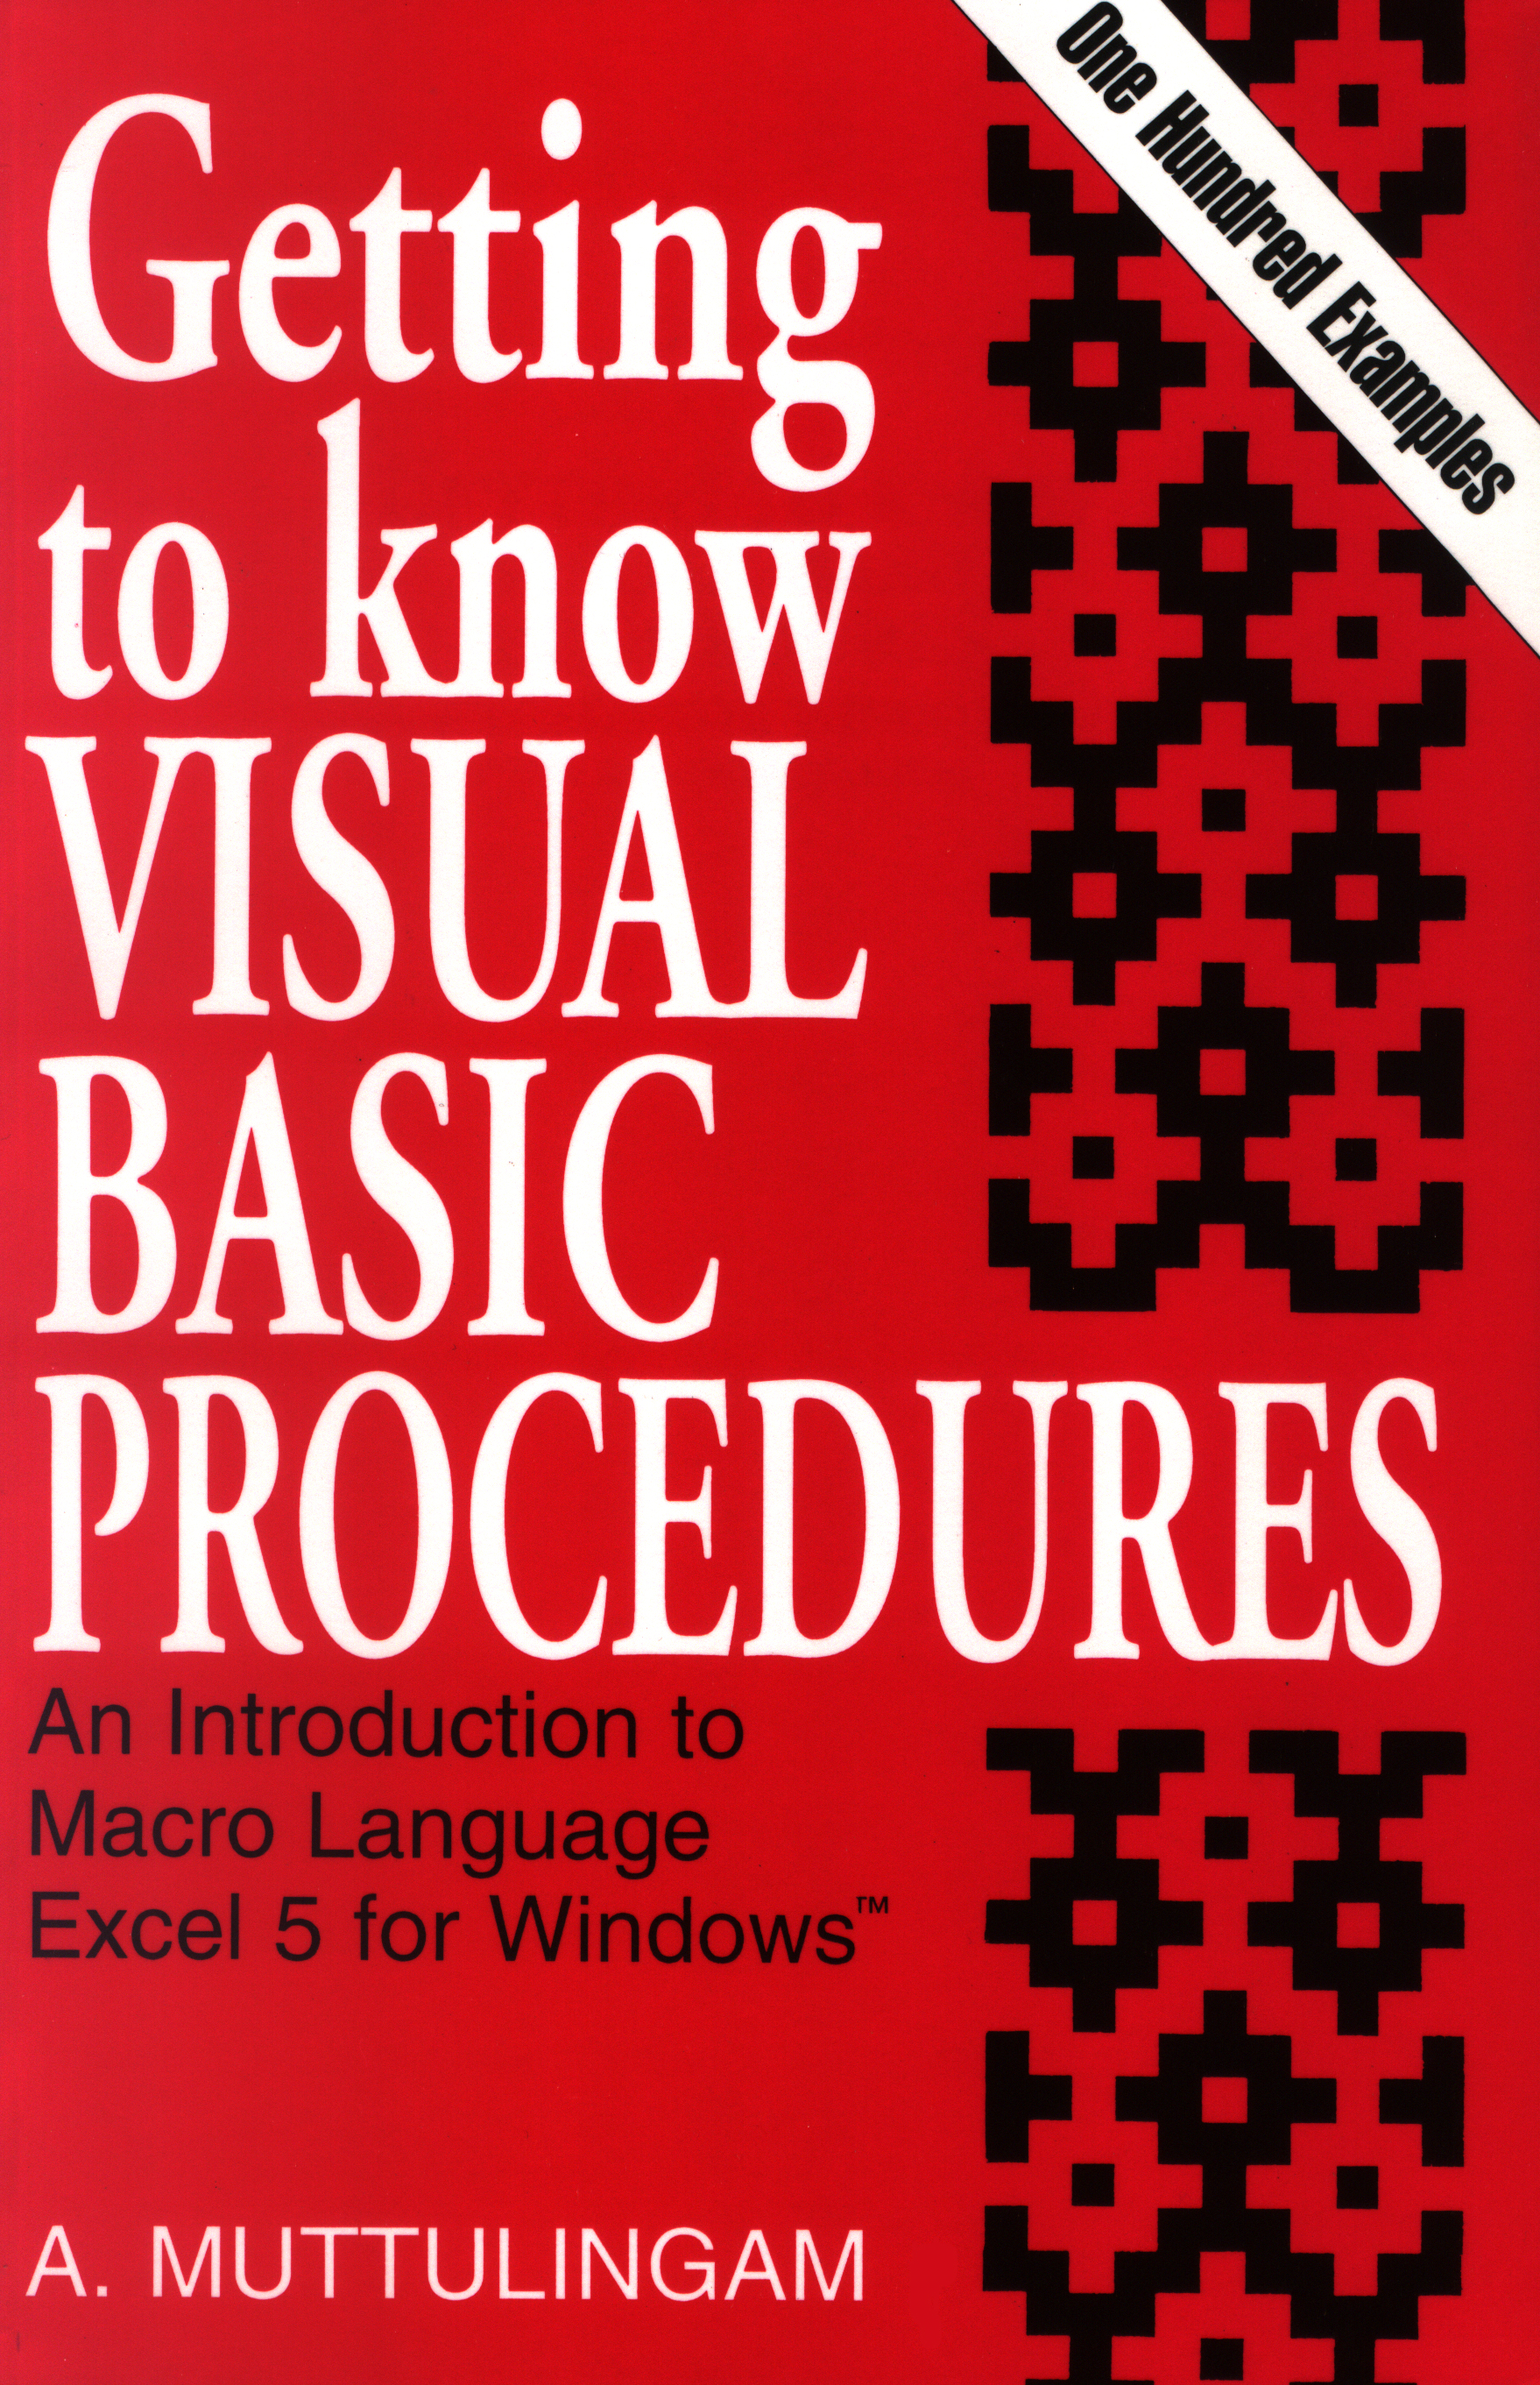 Getting to know Visual Basic Procedures